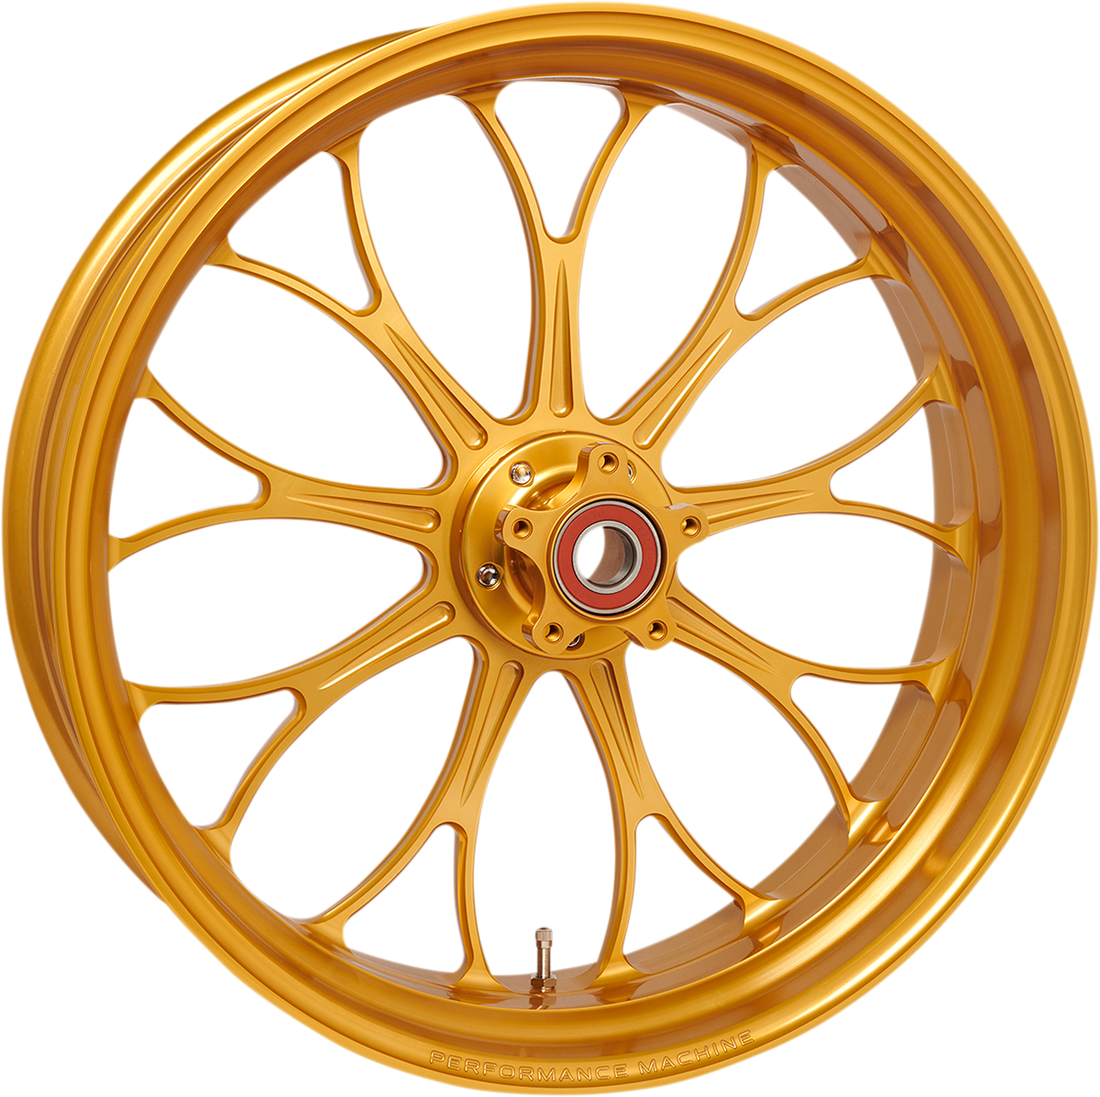 0201-2363 - PERFORMANCE MACHINE (PM) Wheel - Revolution - Dual Disc - Front - Gold Ops* - 21"x3.50" - With ABS 12047106RVNJAPG